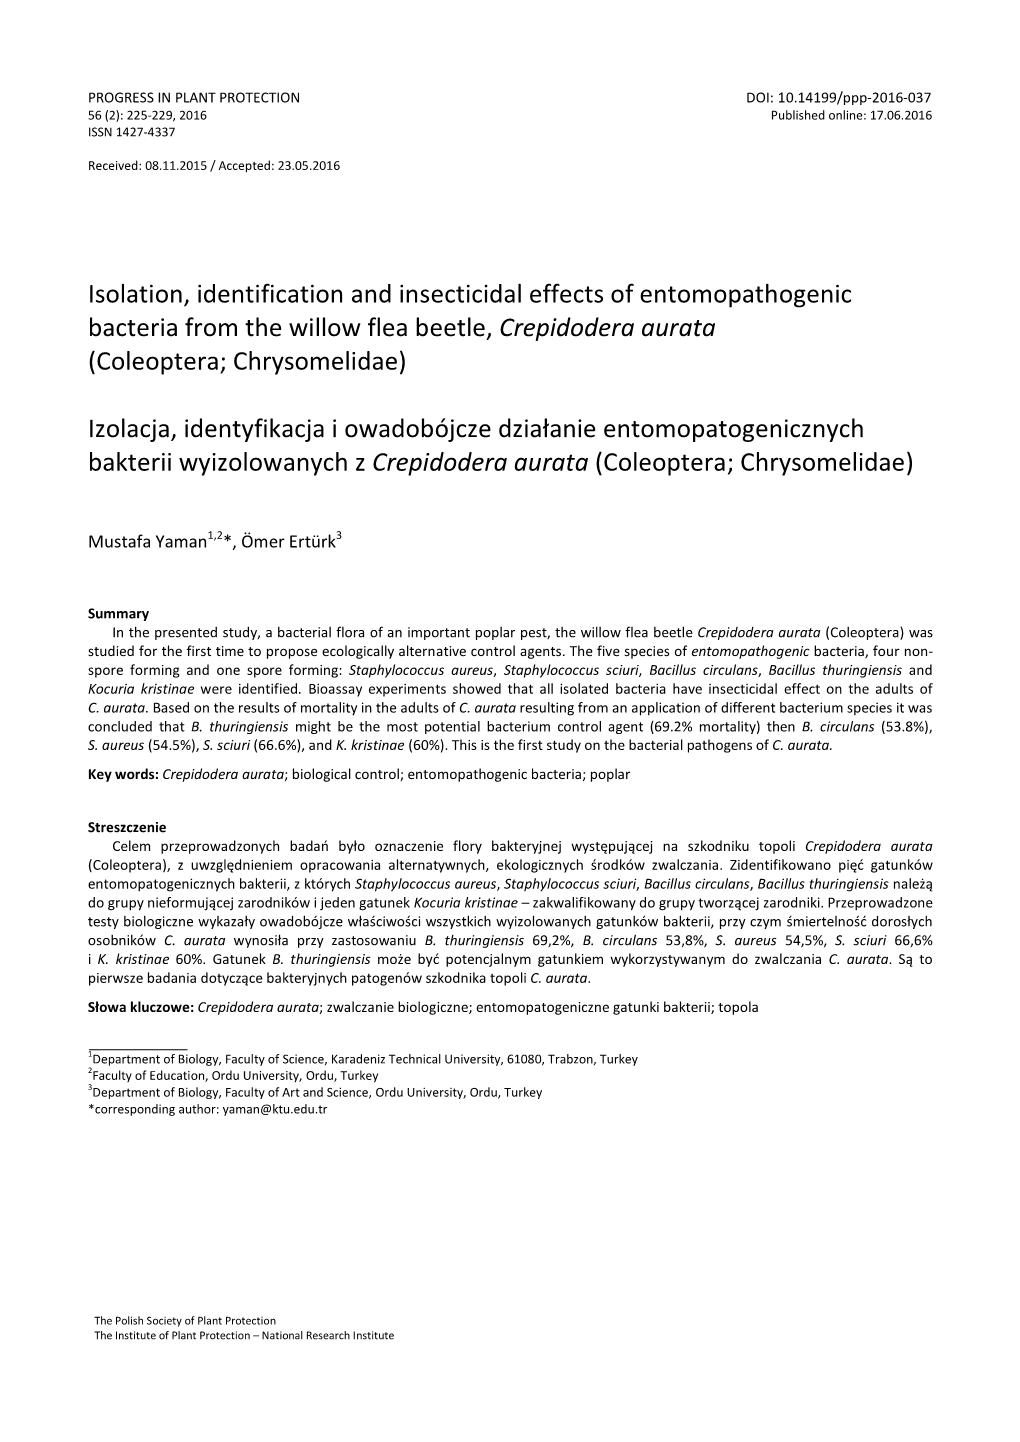 Isolation, Identification and Insecticidal Effects of Entomopathogenic Bacteria from the Willow Flea Beetle, Crepidodera Aurata (Coleoptera; Chrysomelidae)